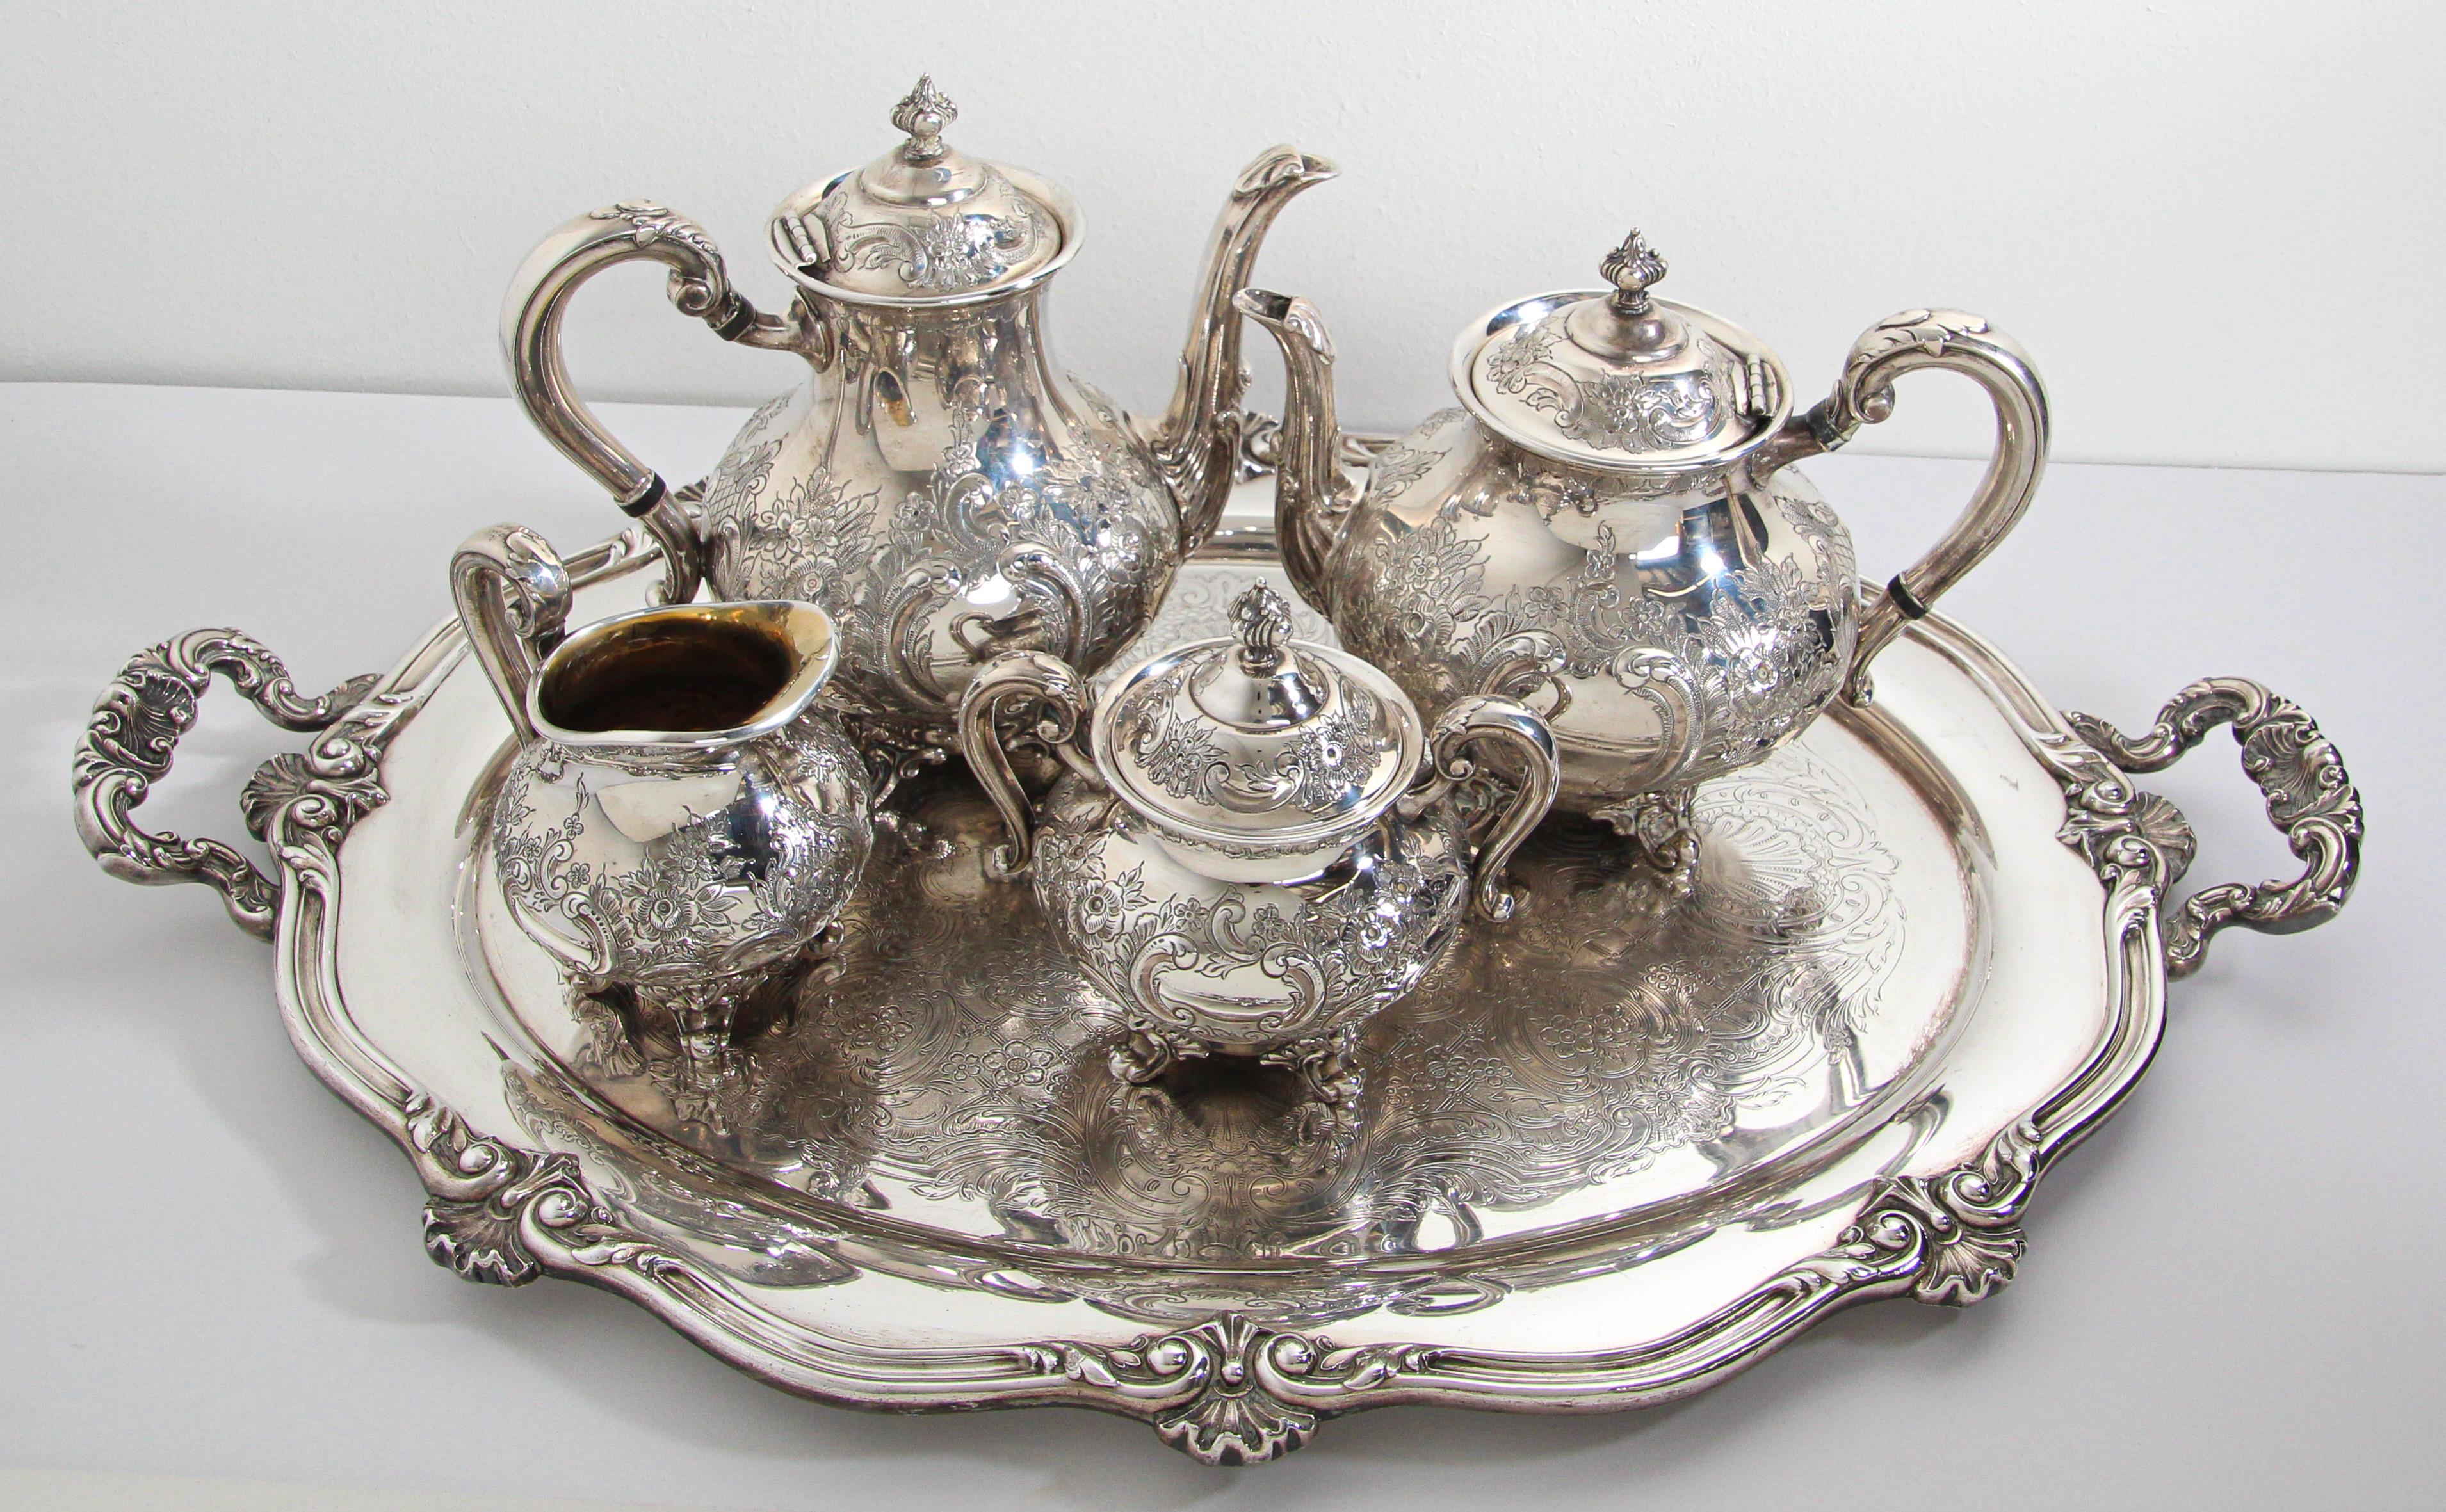 Complete vintage Reed & Barton Regent Hand Chased silverplate pattern 5600C tea and coffee silver plated service set with tray.
This is an absolutely gorgeous silverplate tea set consisting of a teapot, and sugar and creamer. These hand-chased